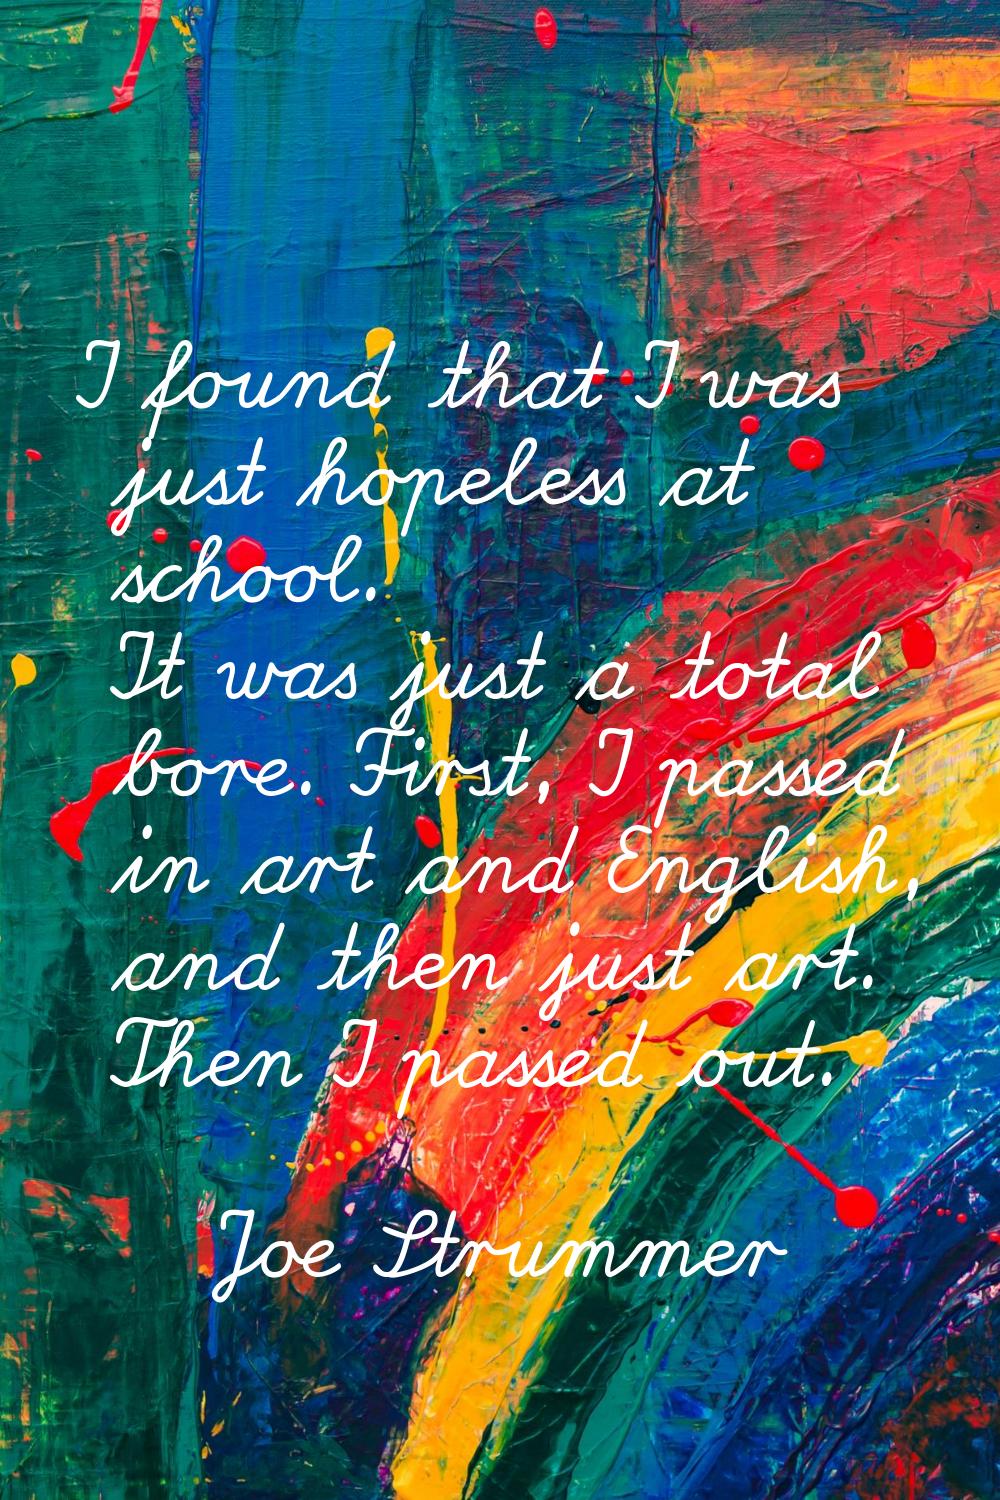 I found that I was just hopeless at school. It was just a total bore. First, I passed in art and En